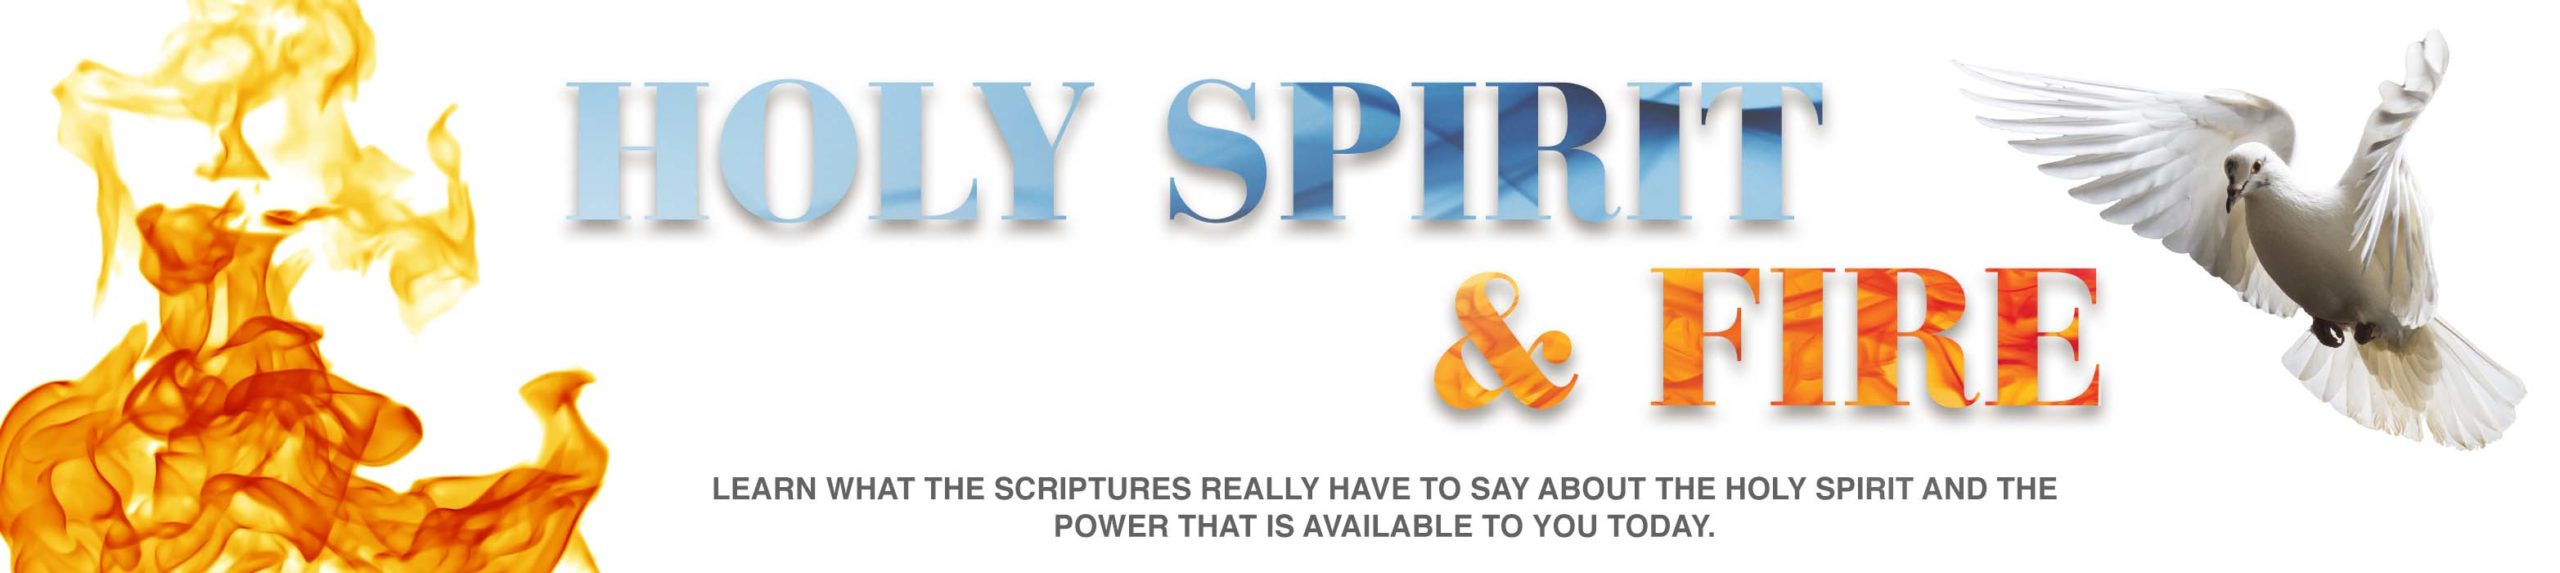 Holy Spirit and Fire Banner